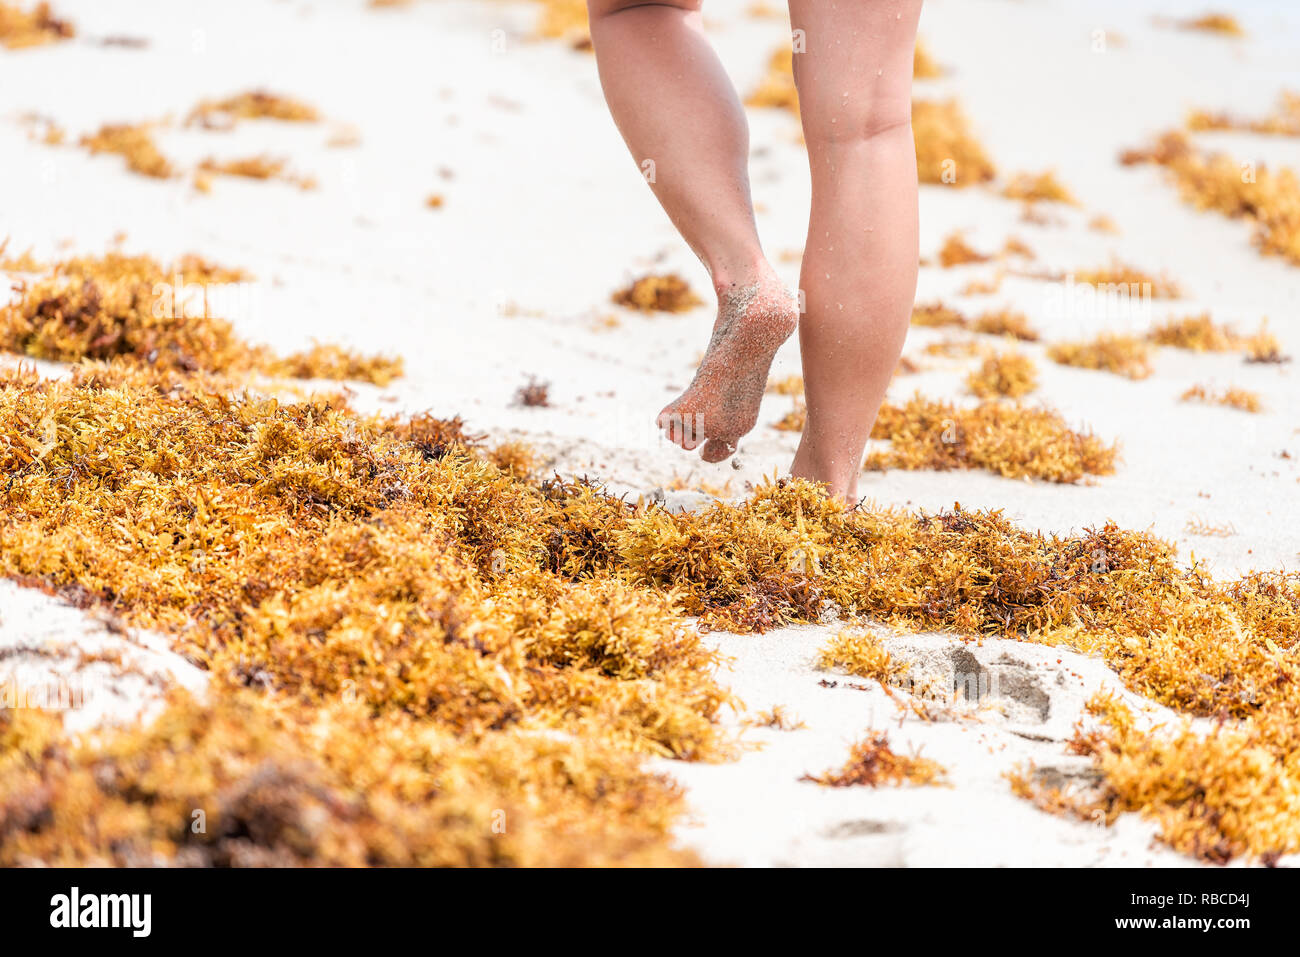 Legs of woman walking closeup on beach during sunny day in Miami, Florida with yellow sargassum seaweed Stock Photo